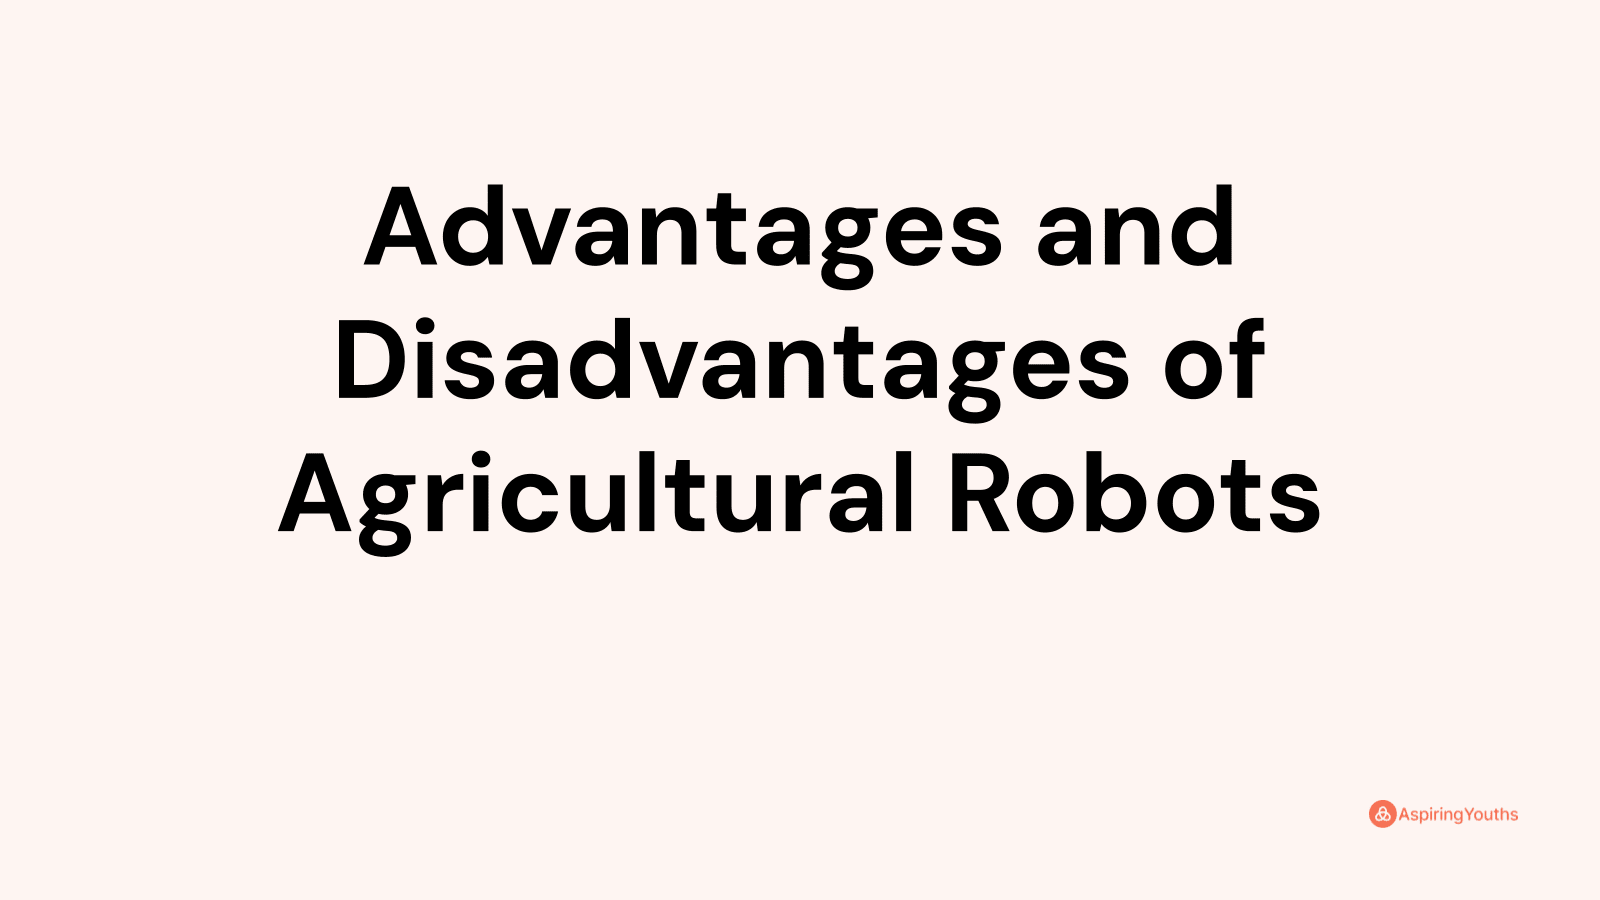 Advantages and disadvantages of Agricultural Robots